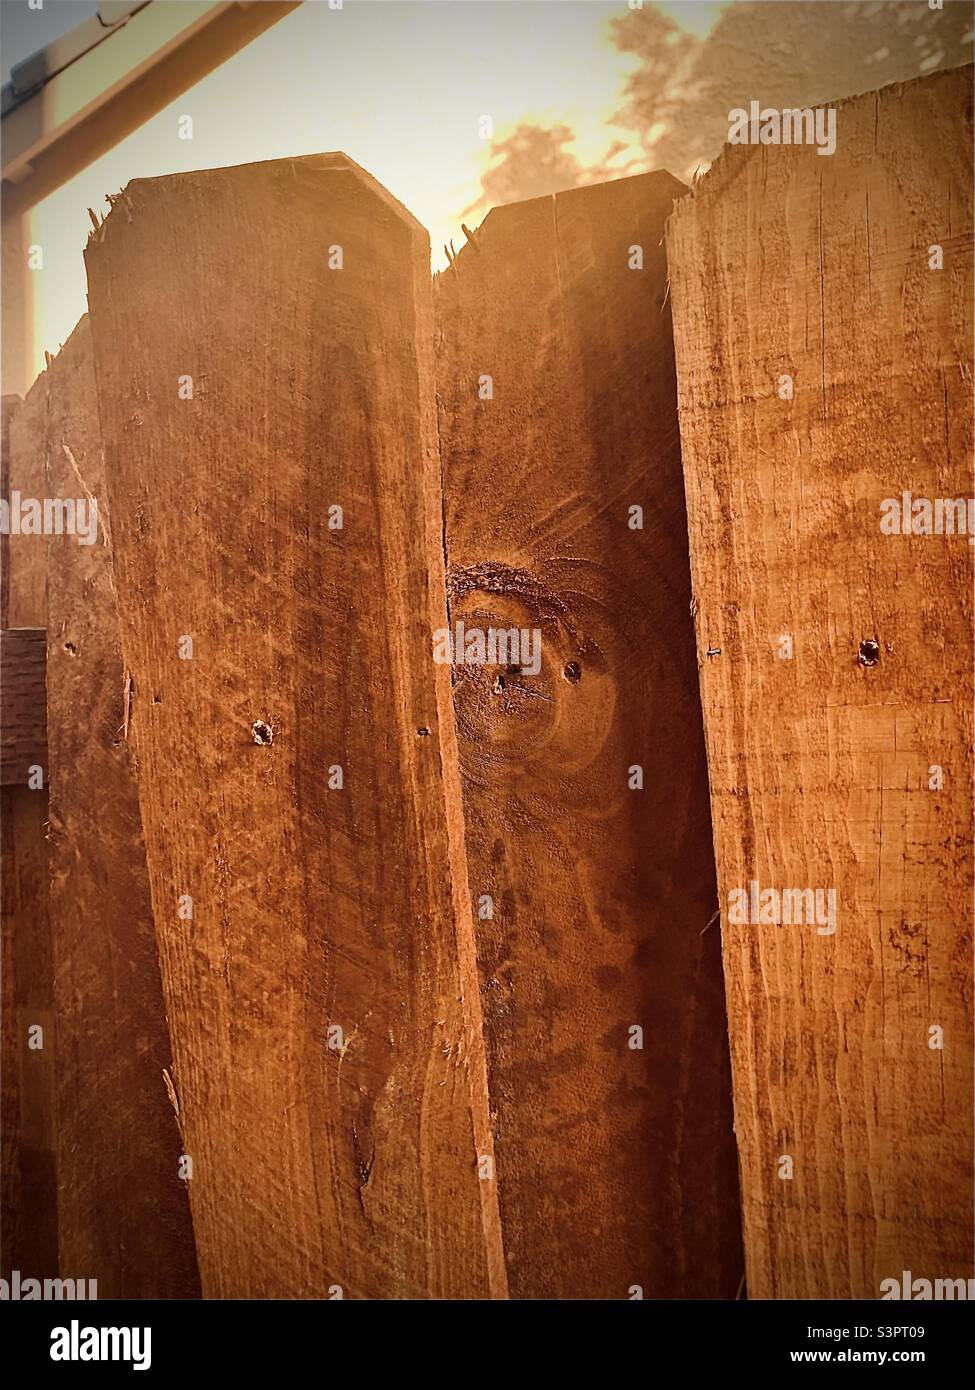 Cedar fence - wooden fence and boards Stock Photo